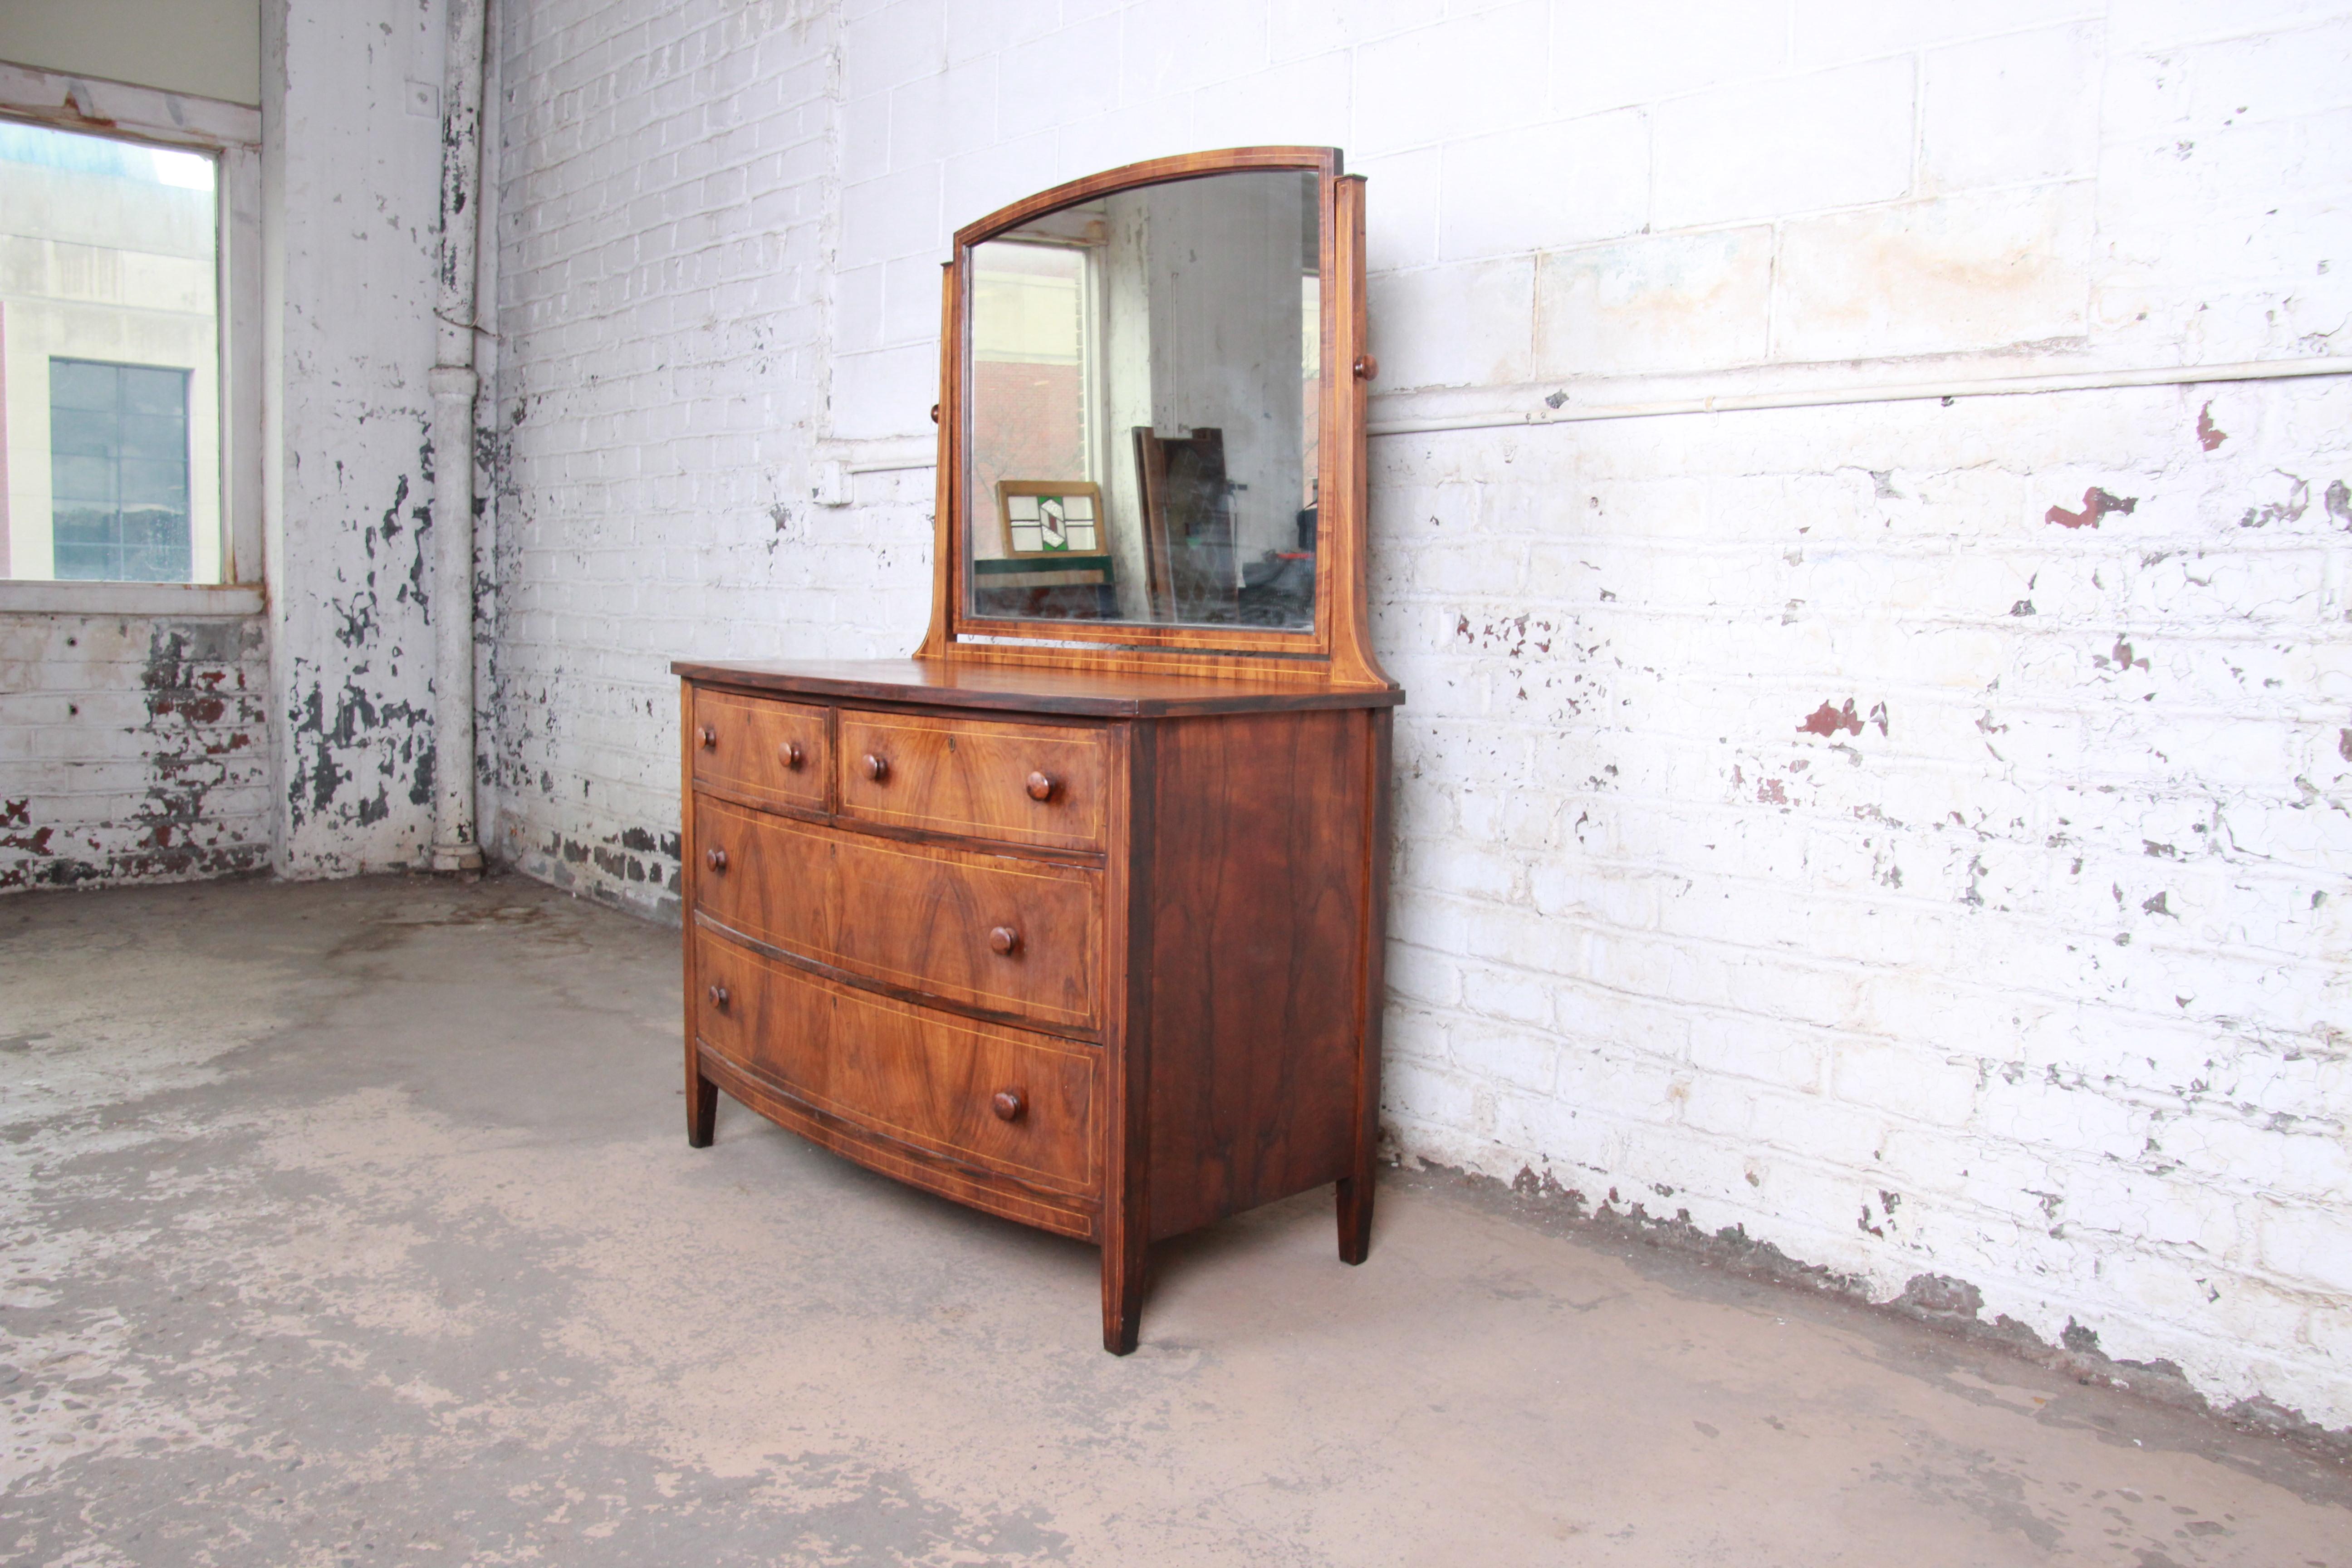 A gorgeous antique burled walnut dresser with mirror by Spencer & Barnes Co. of Benton Harbor, MI. The dresser features stunning book-matched wood grain with string inlay and a nice traditional Early American style. It offers good storage, with four